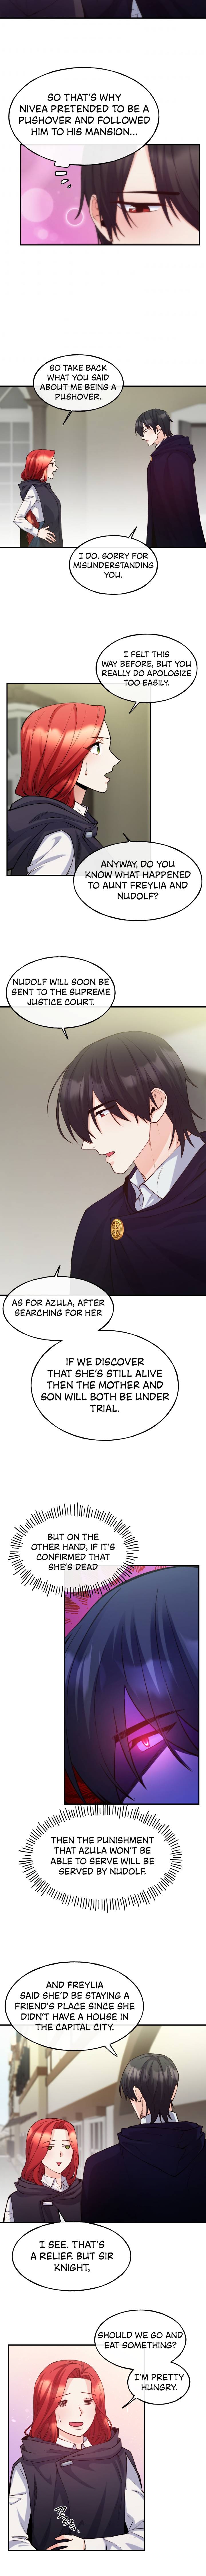 Not Just Anyone Can Become a Villainess chapter 63 page 3